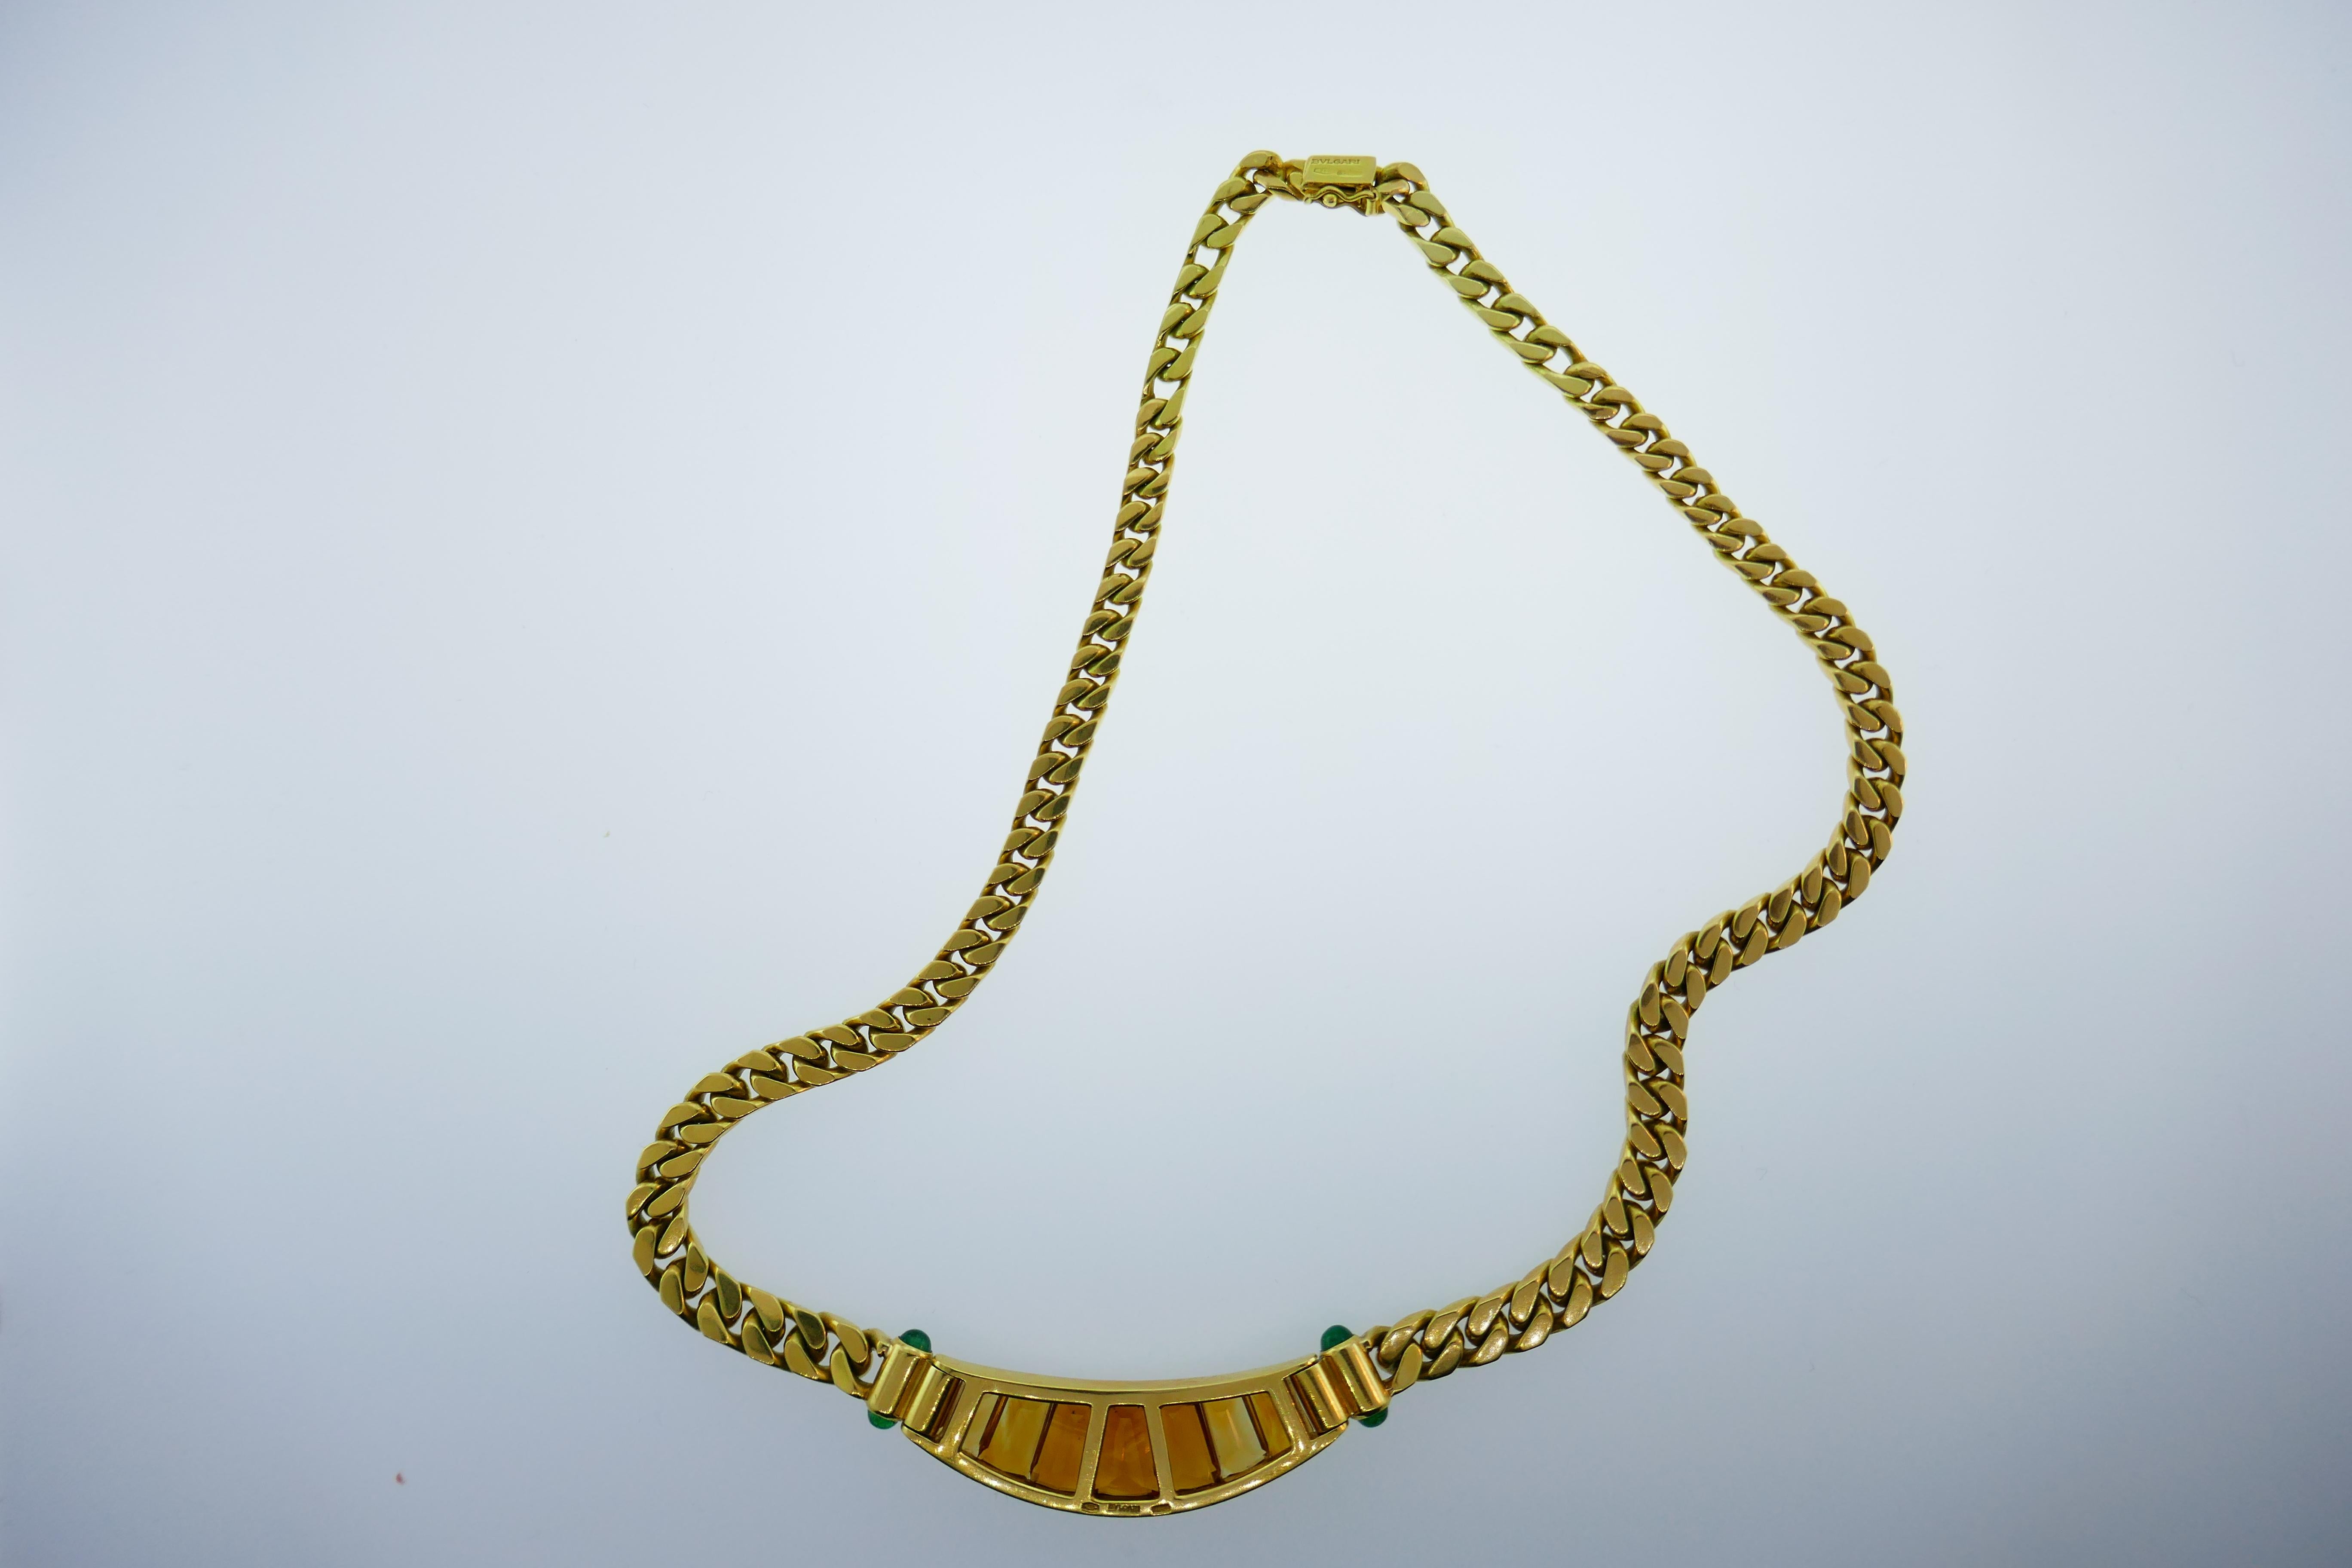 An iconic, groovy and funky design depicting the 1970s at its best; Bvlgari has done it again with this necklace!

Weight: 86.5 grams 

Dimensions: 17